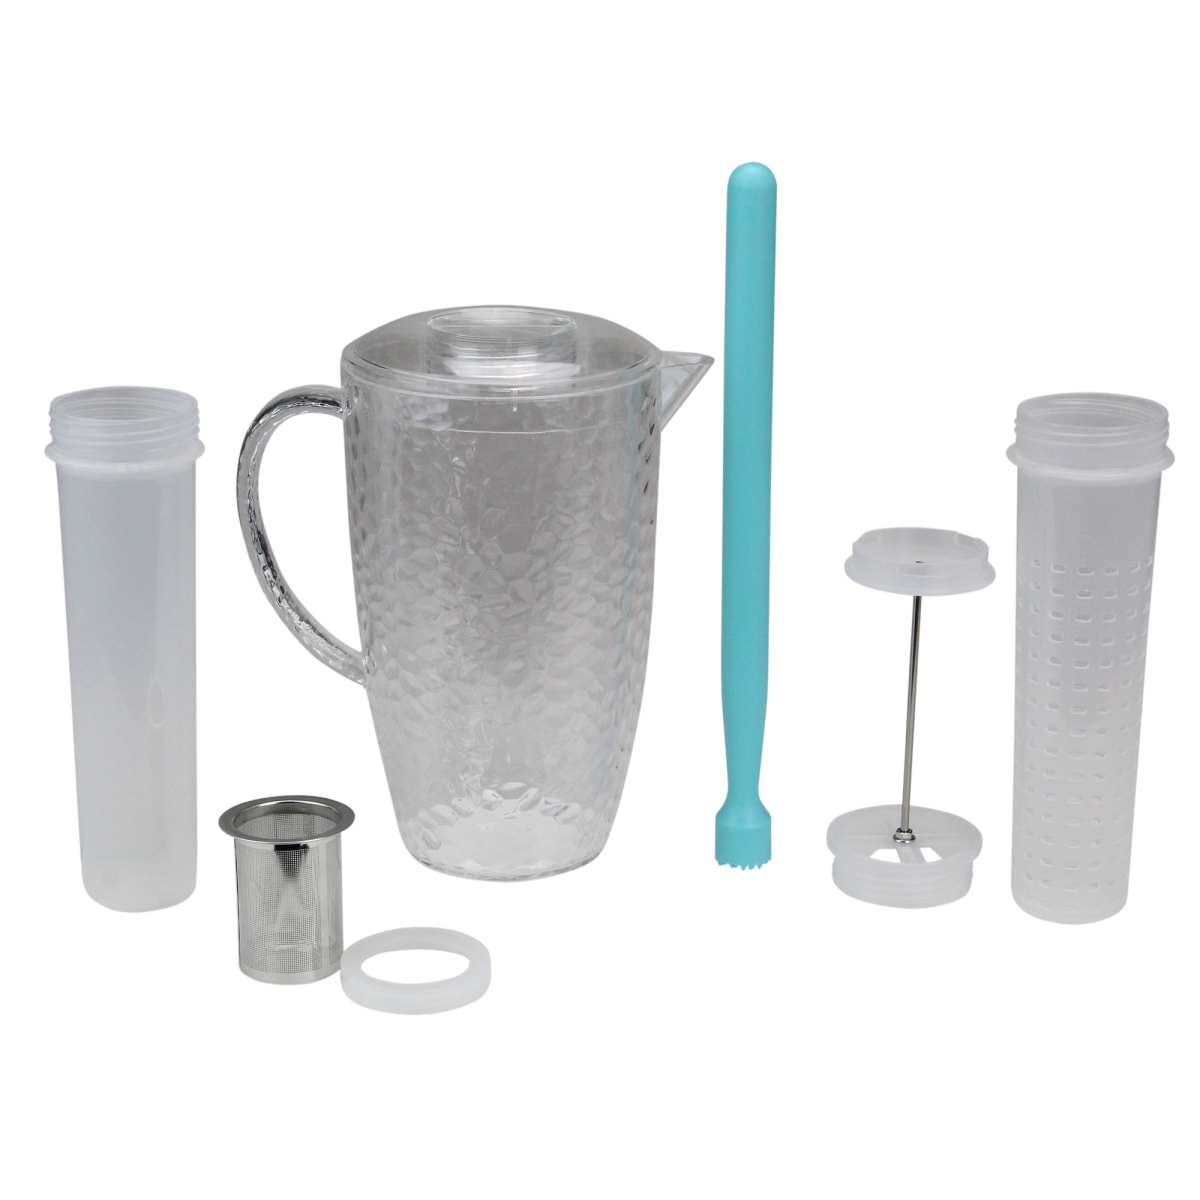 Picture of Avon 33537529 2 ltr 4-in-1 Flavor Infuser Pitcher - 9.5 in.